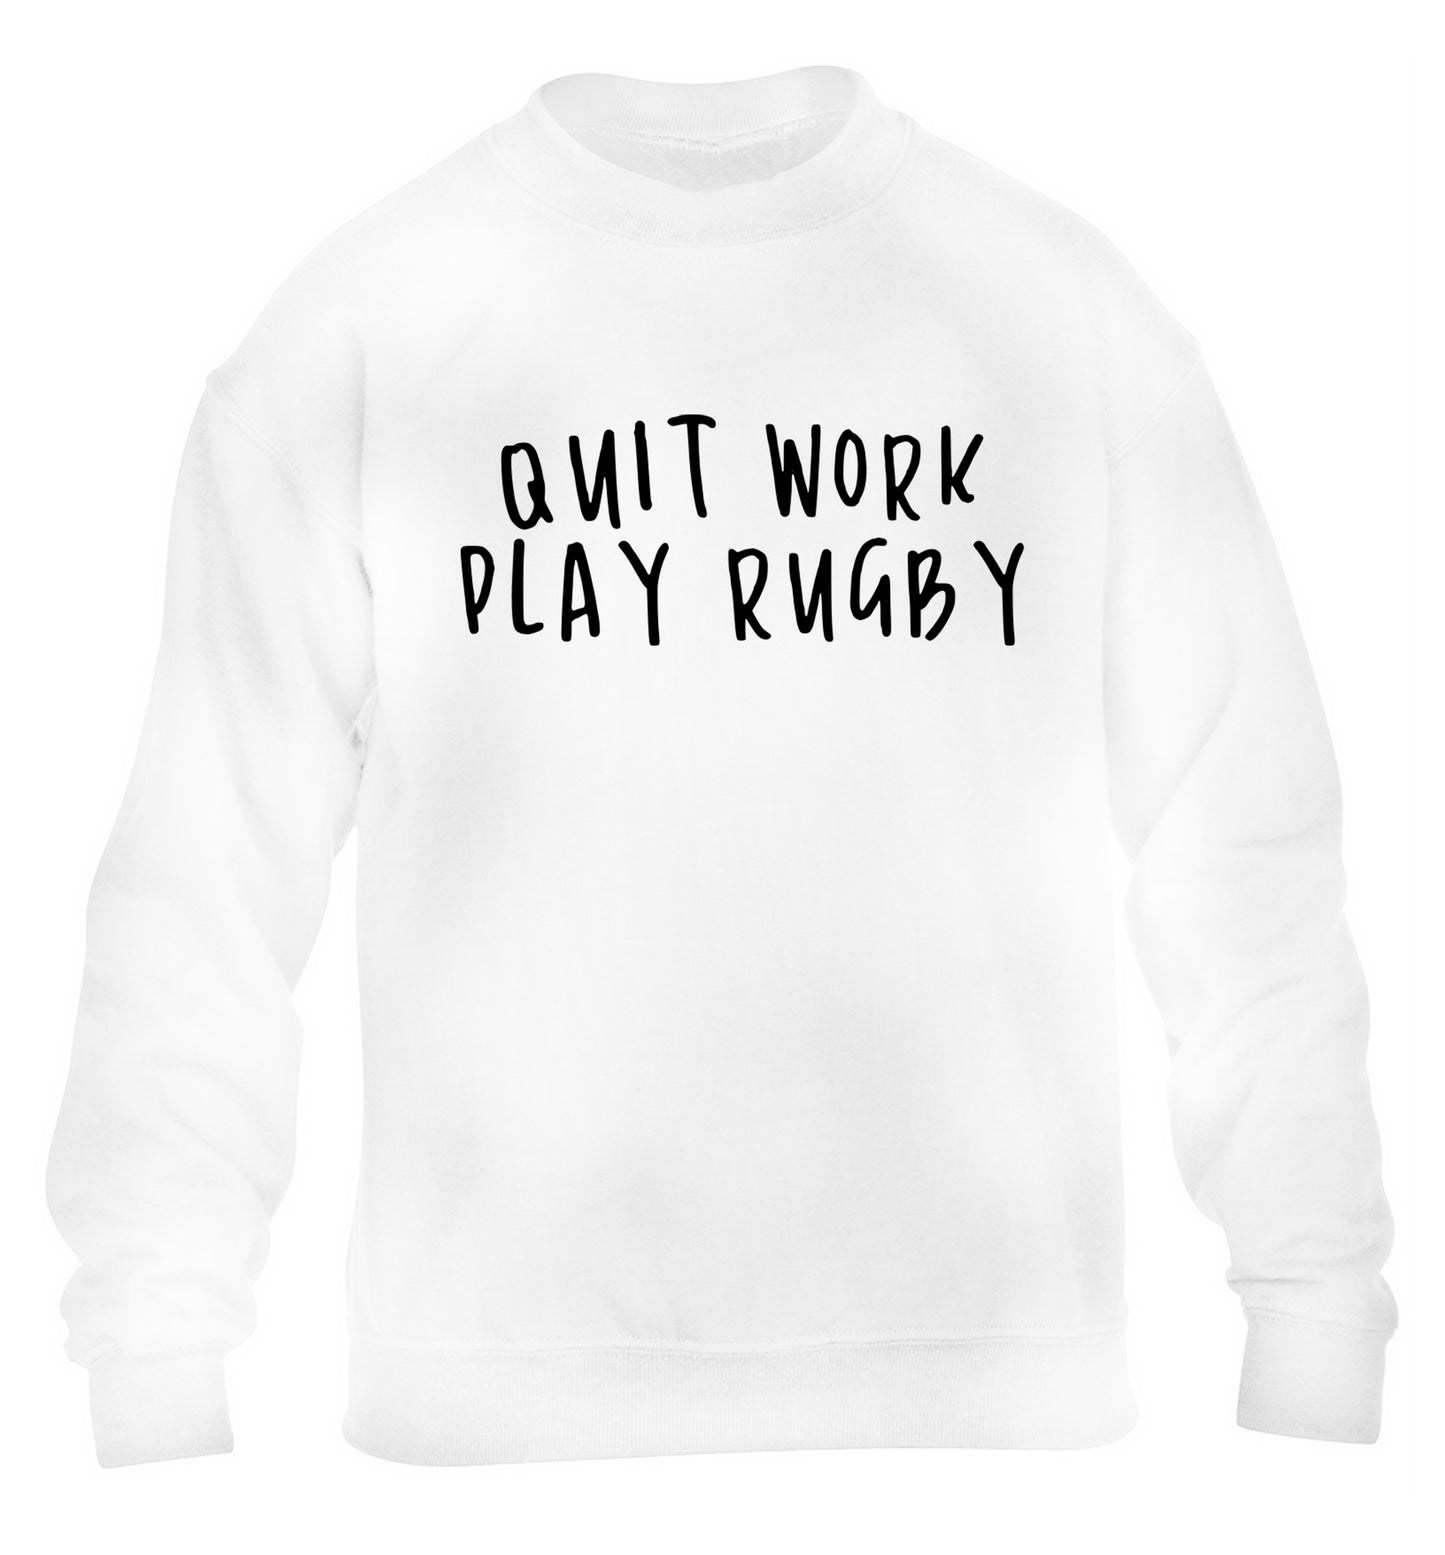 Quit work play rugby children's white sweater 12-13 Years